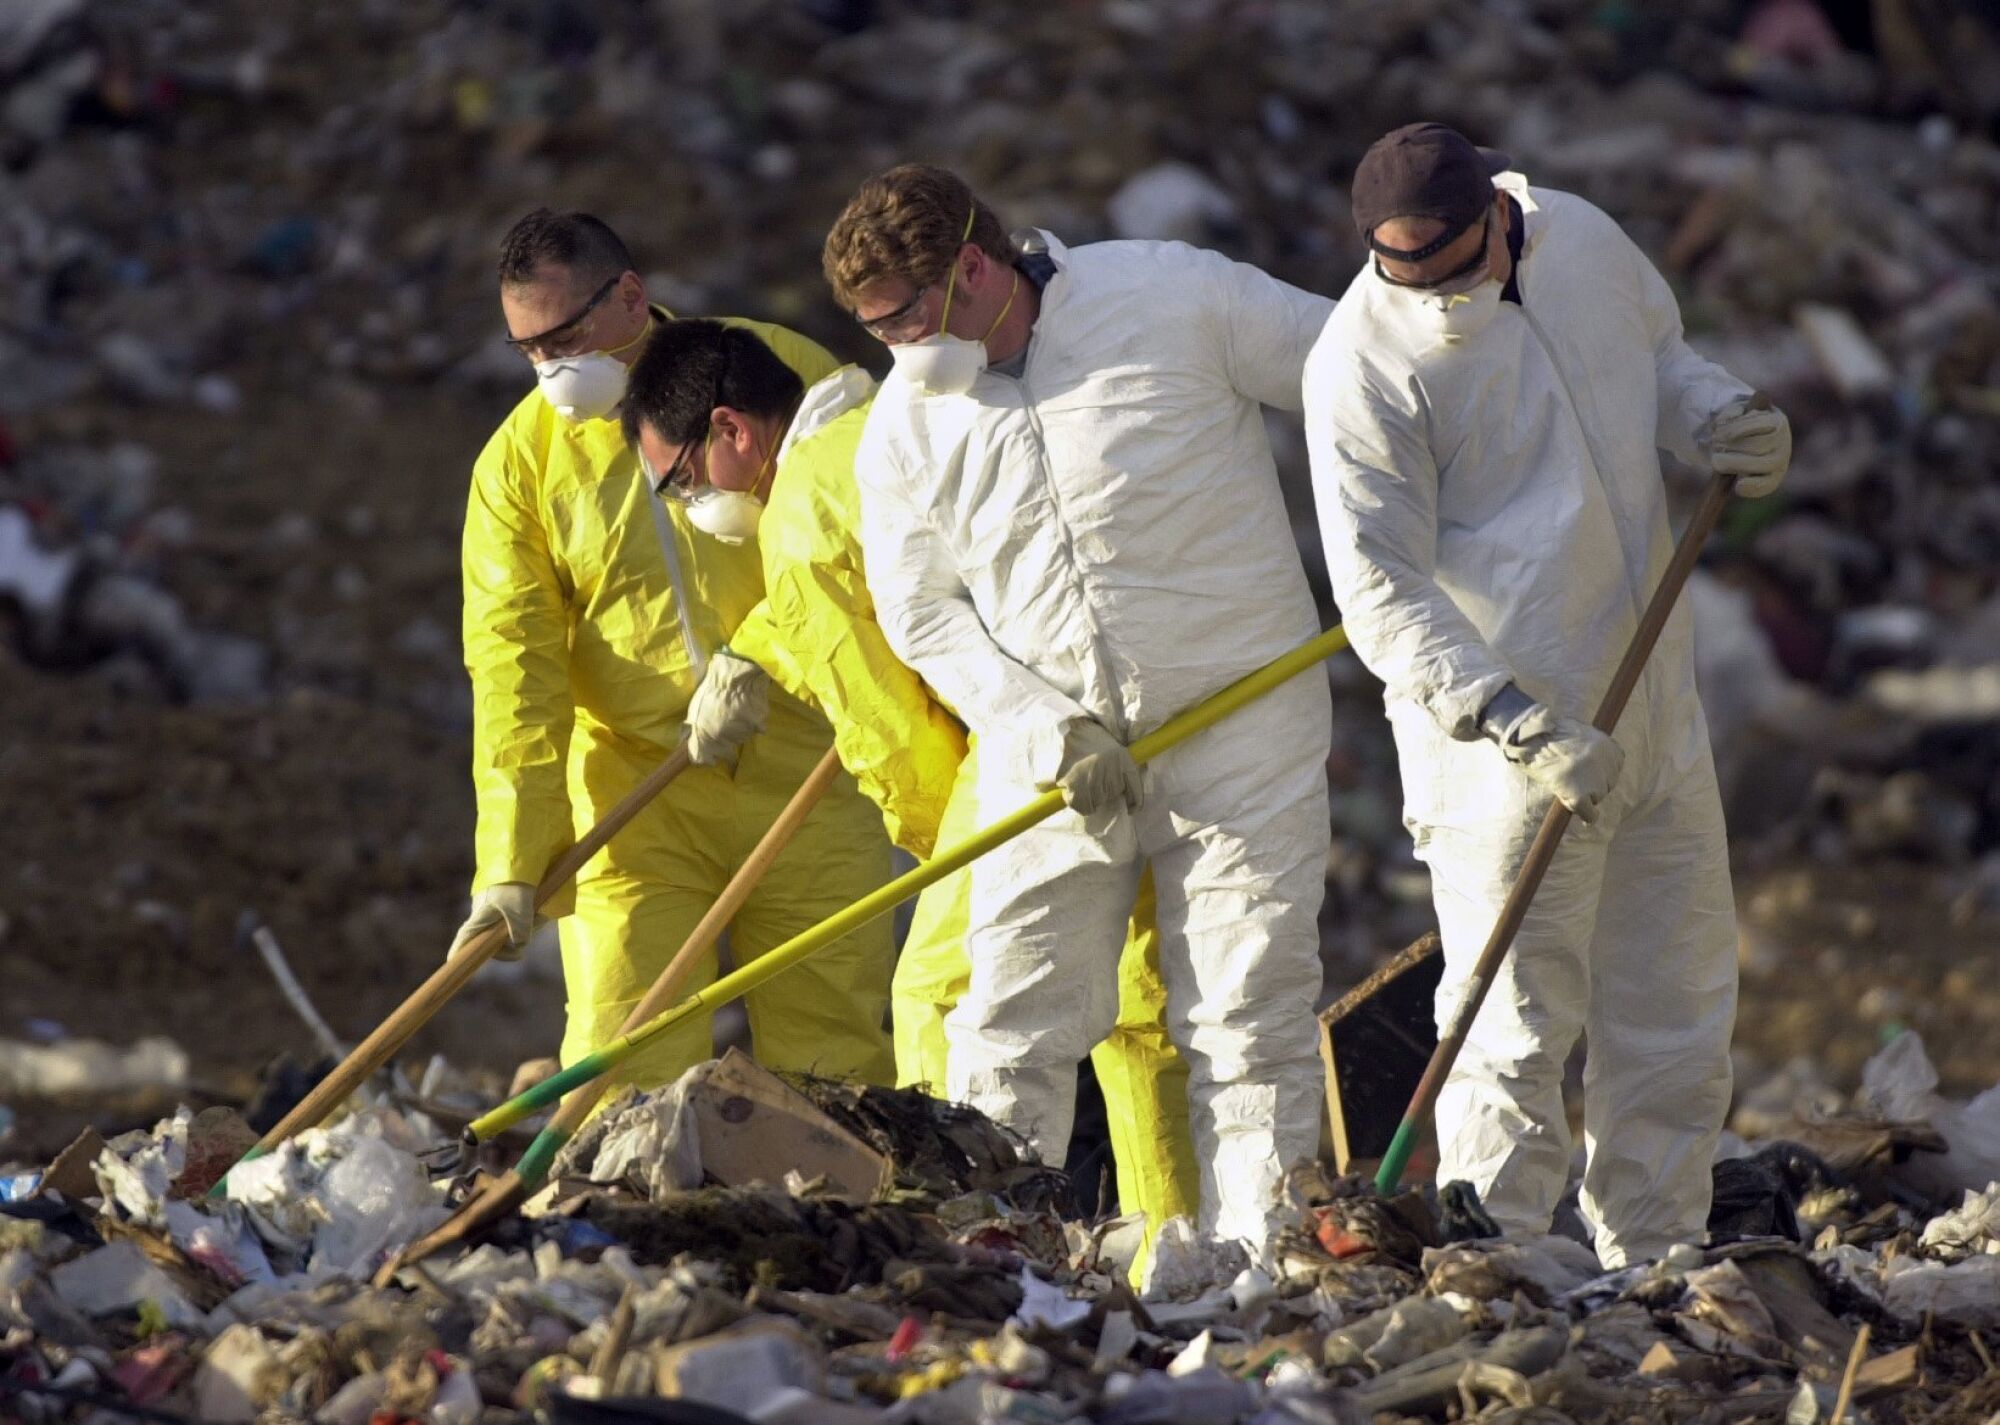 San Diego police officers sift through trash at the Miramar Landfill on Tuesday, April 30, 2002.